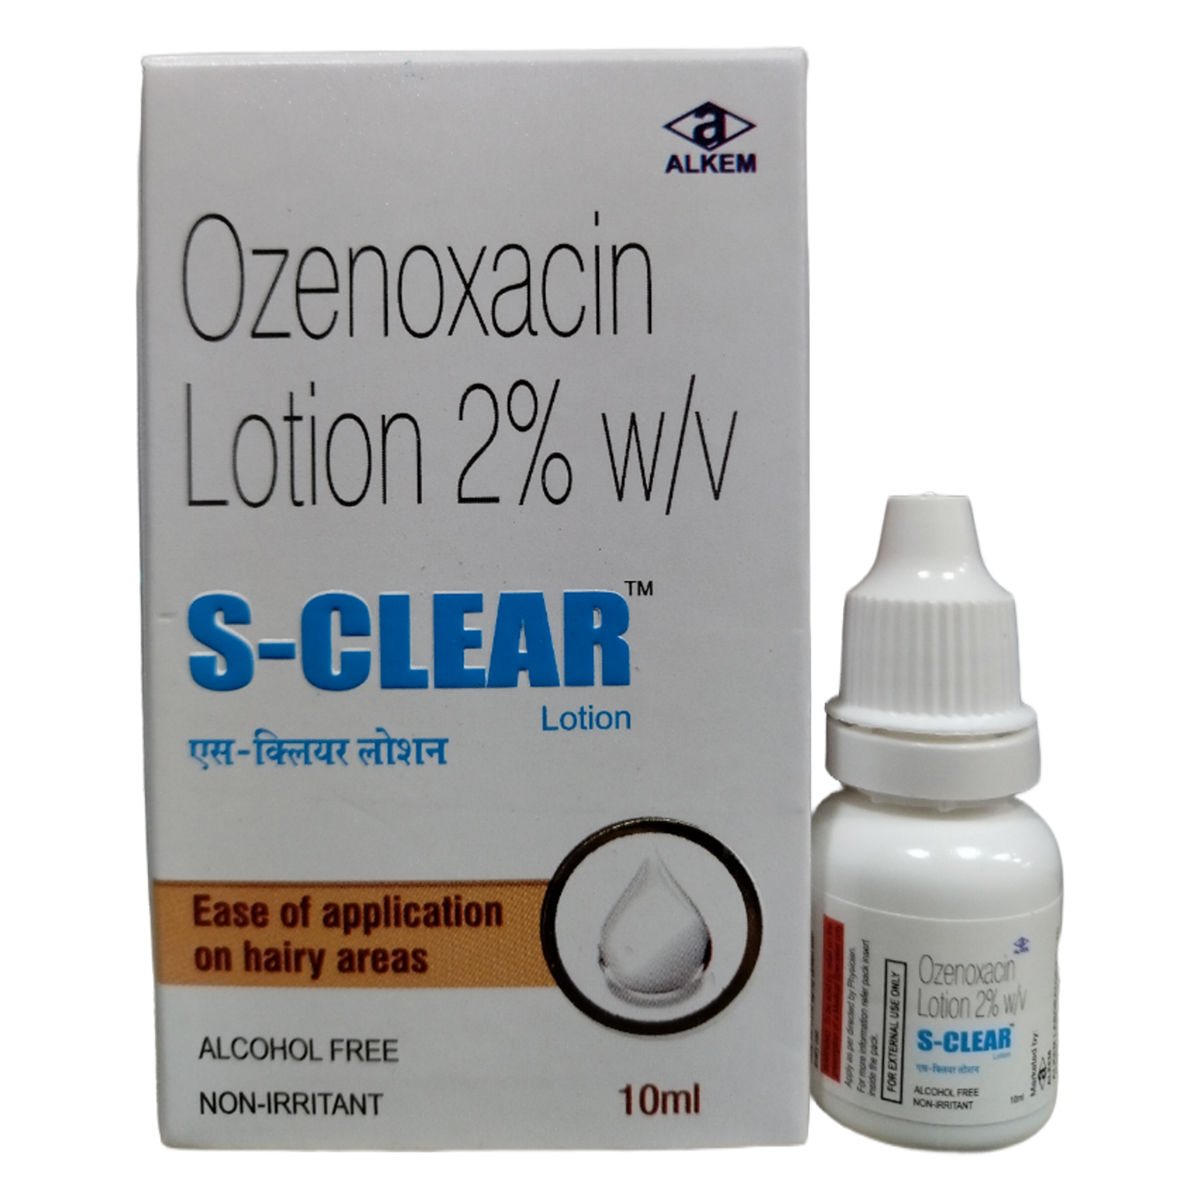 S-Clear 2% Lotion 10 ml, Pack of 1 LOTION